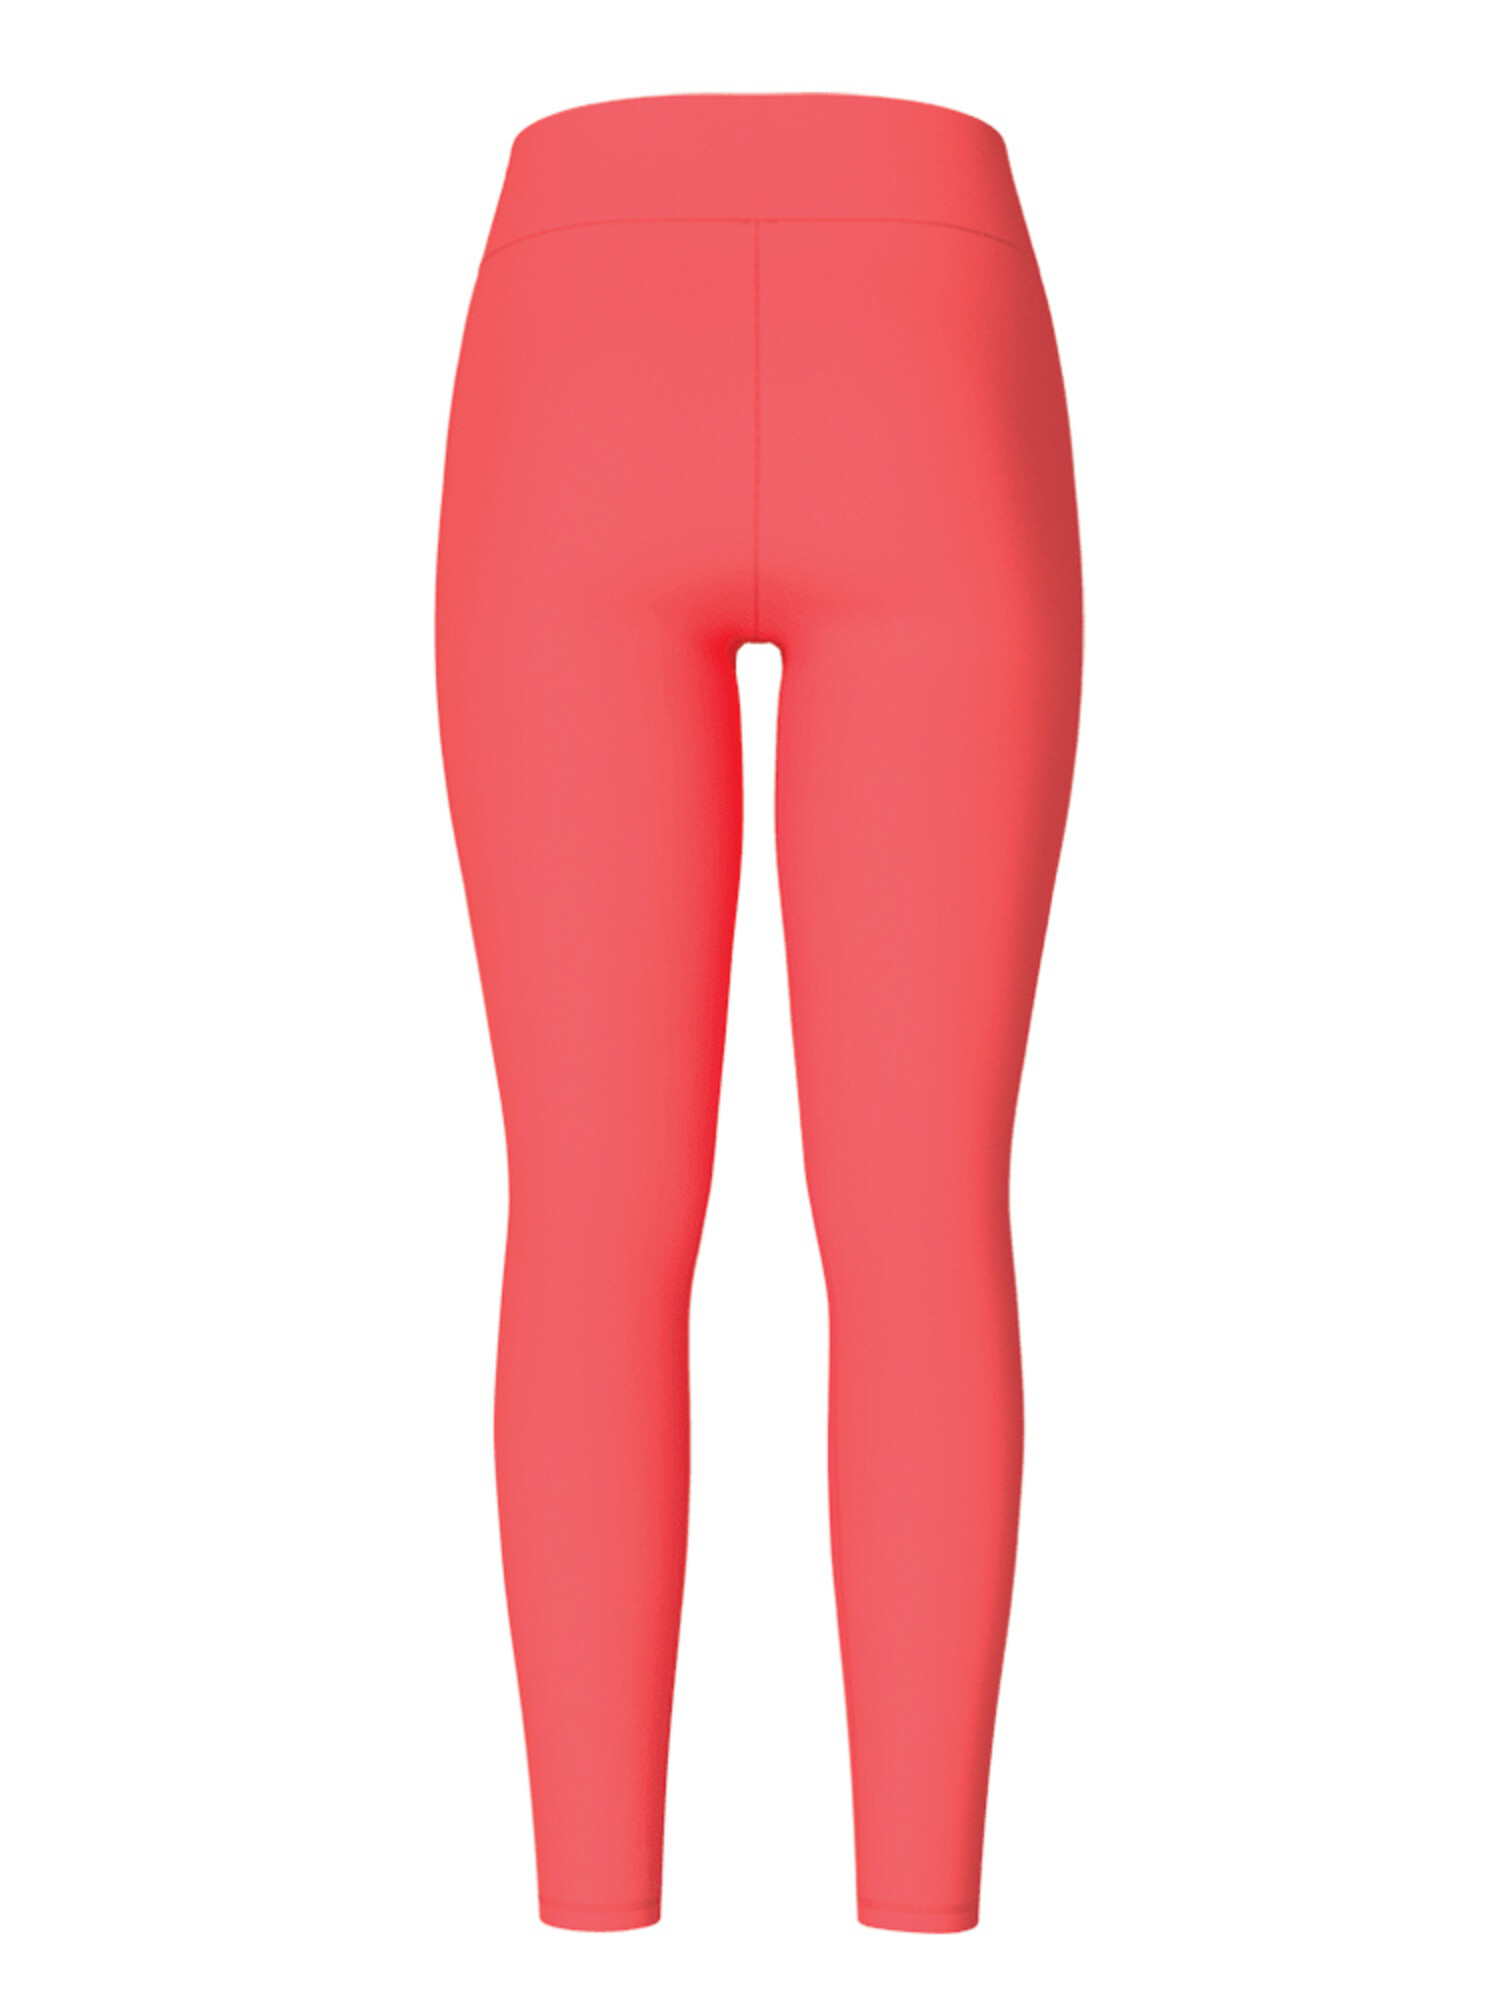 WOMEN'S DOTKNIT TIGHT, The North Face